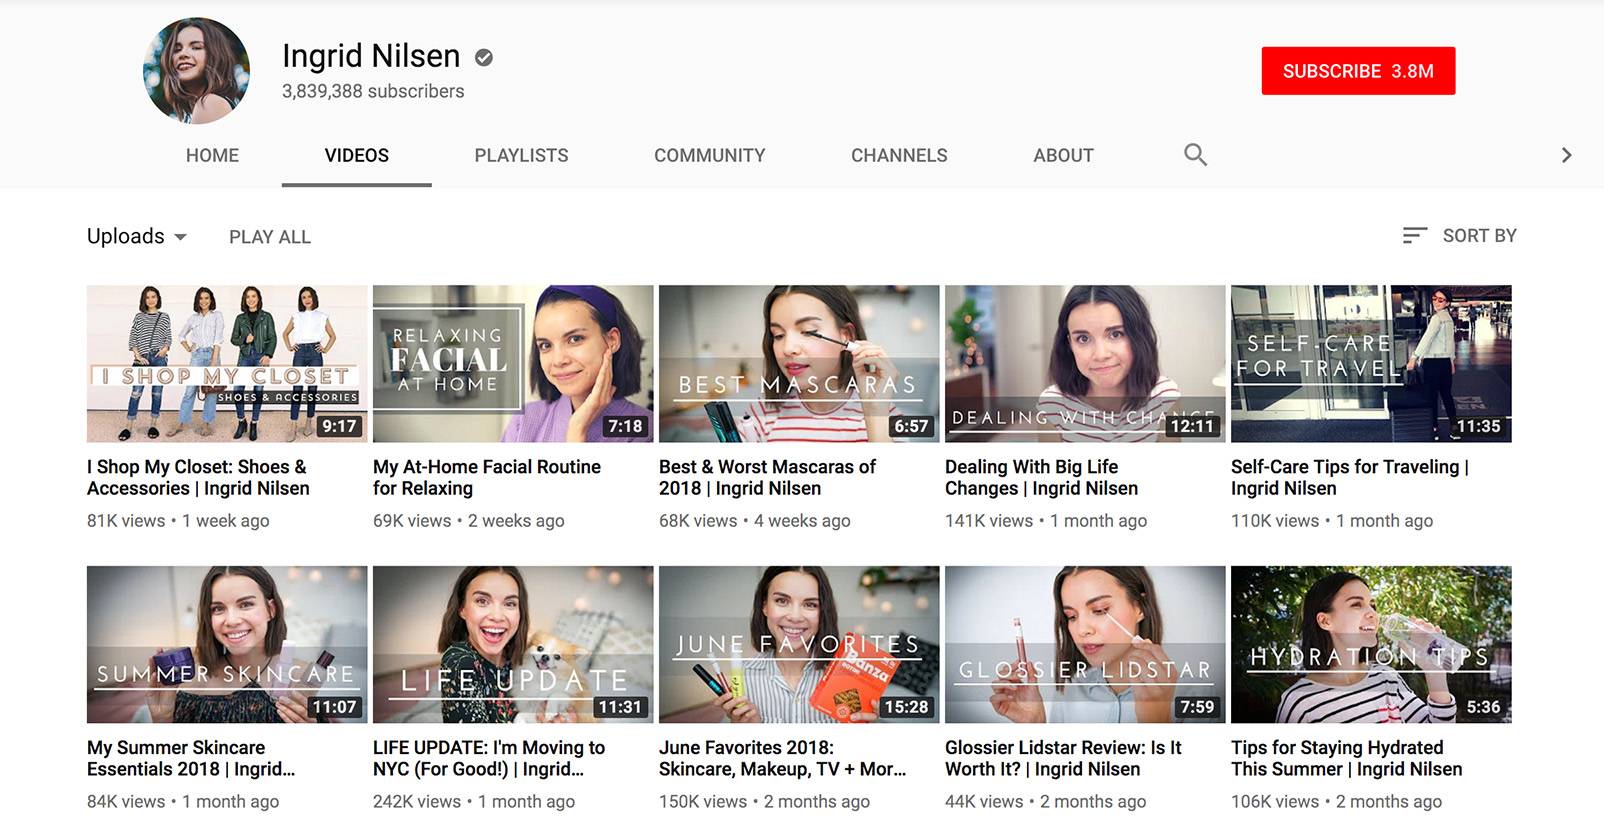 Ingrid Nilsen's YouTube channel page